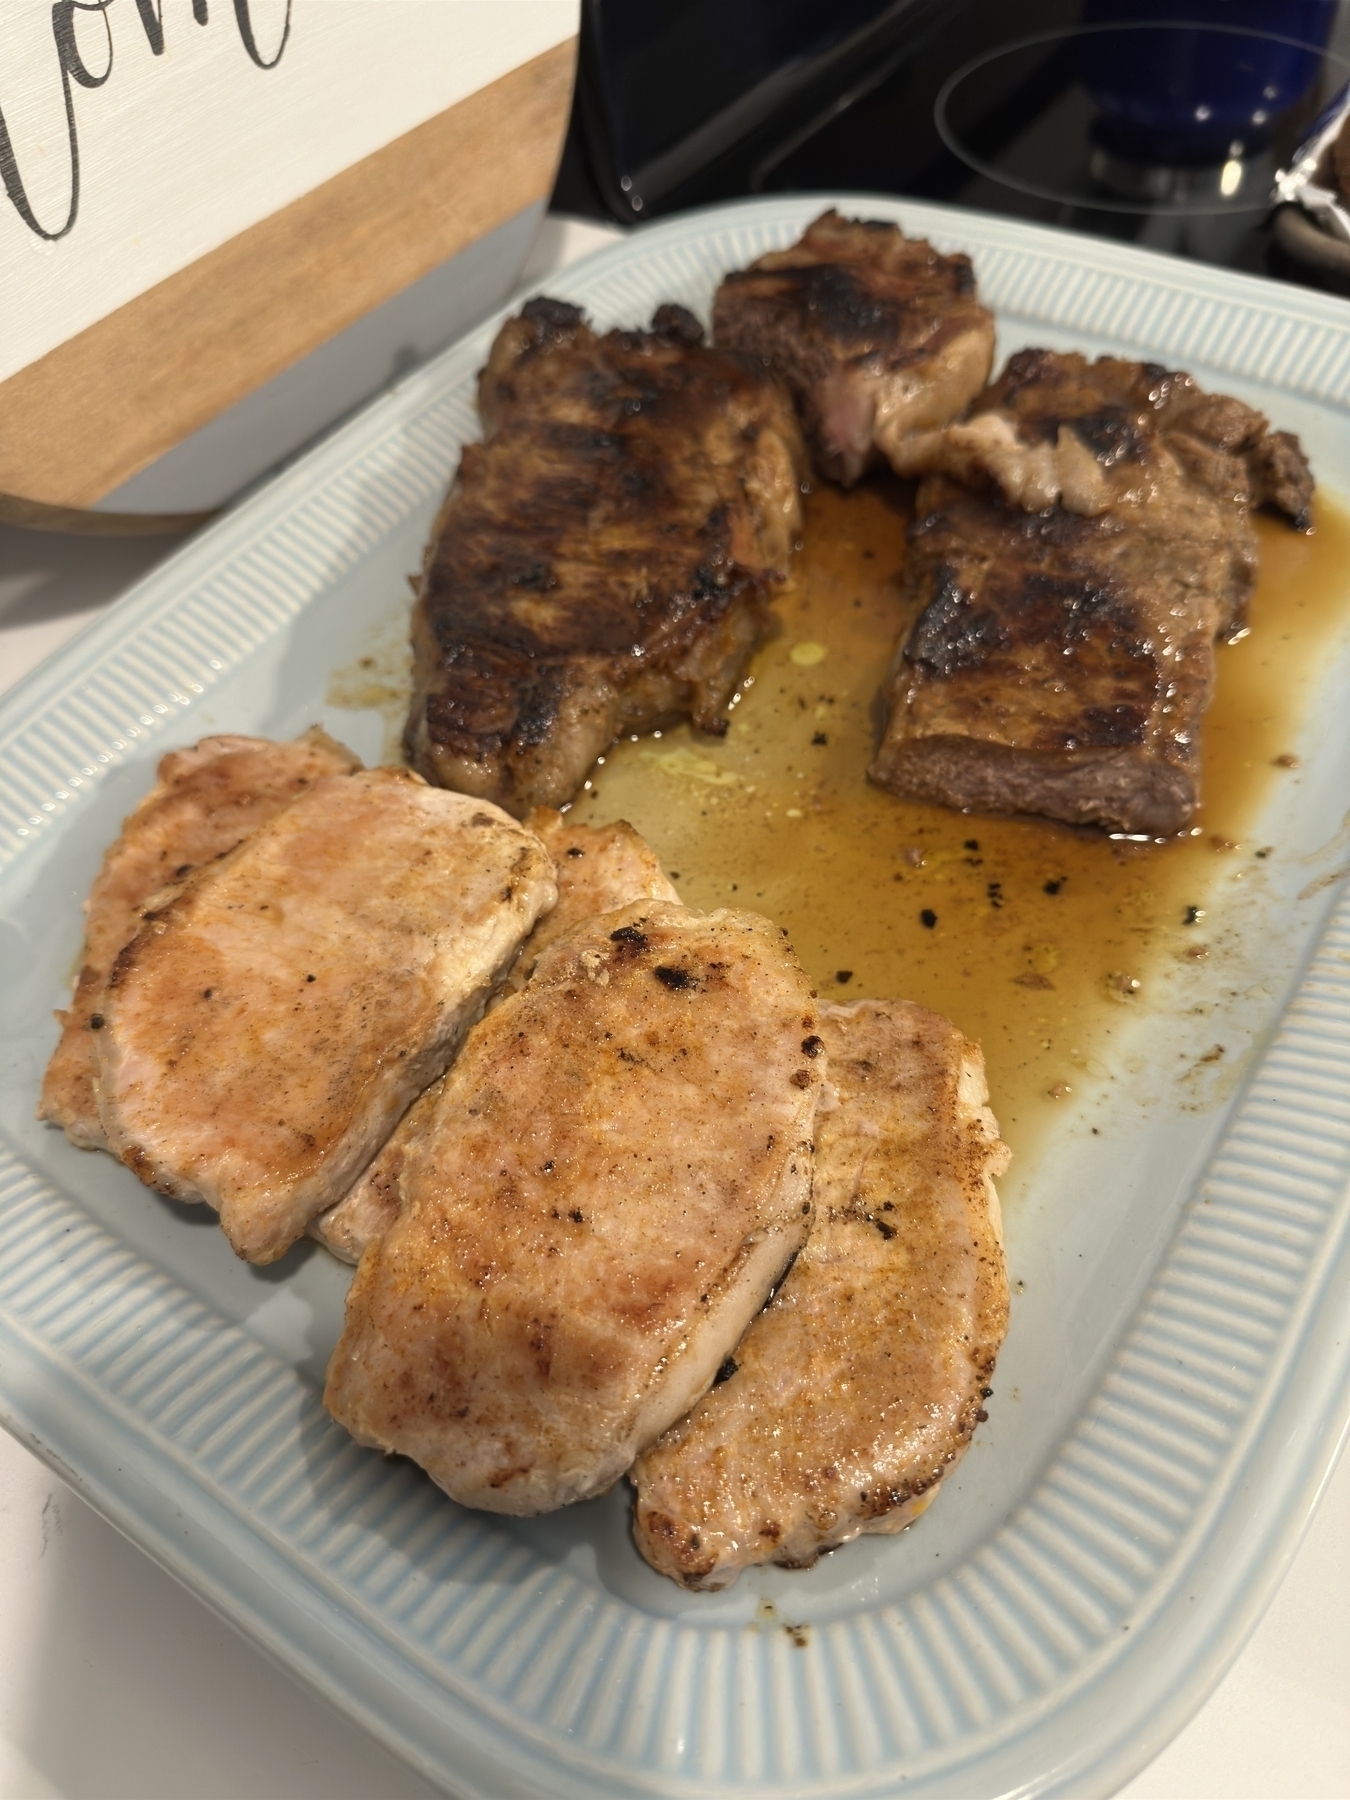 A blue plate with several pieces of grilled meat, some browned and seasoned, sits on a surface next to a cutting board.